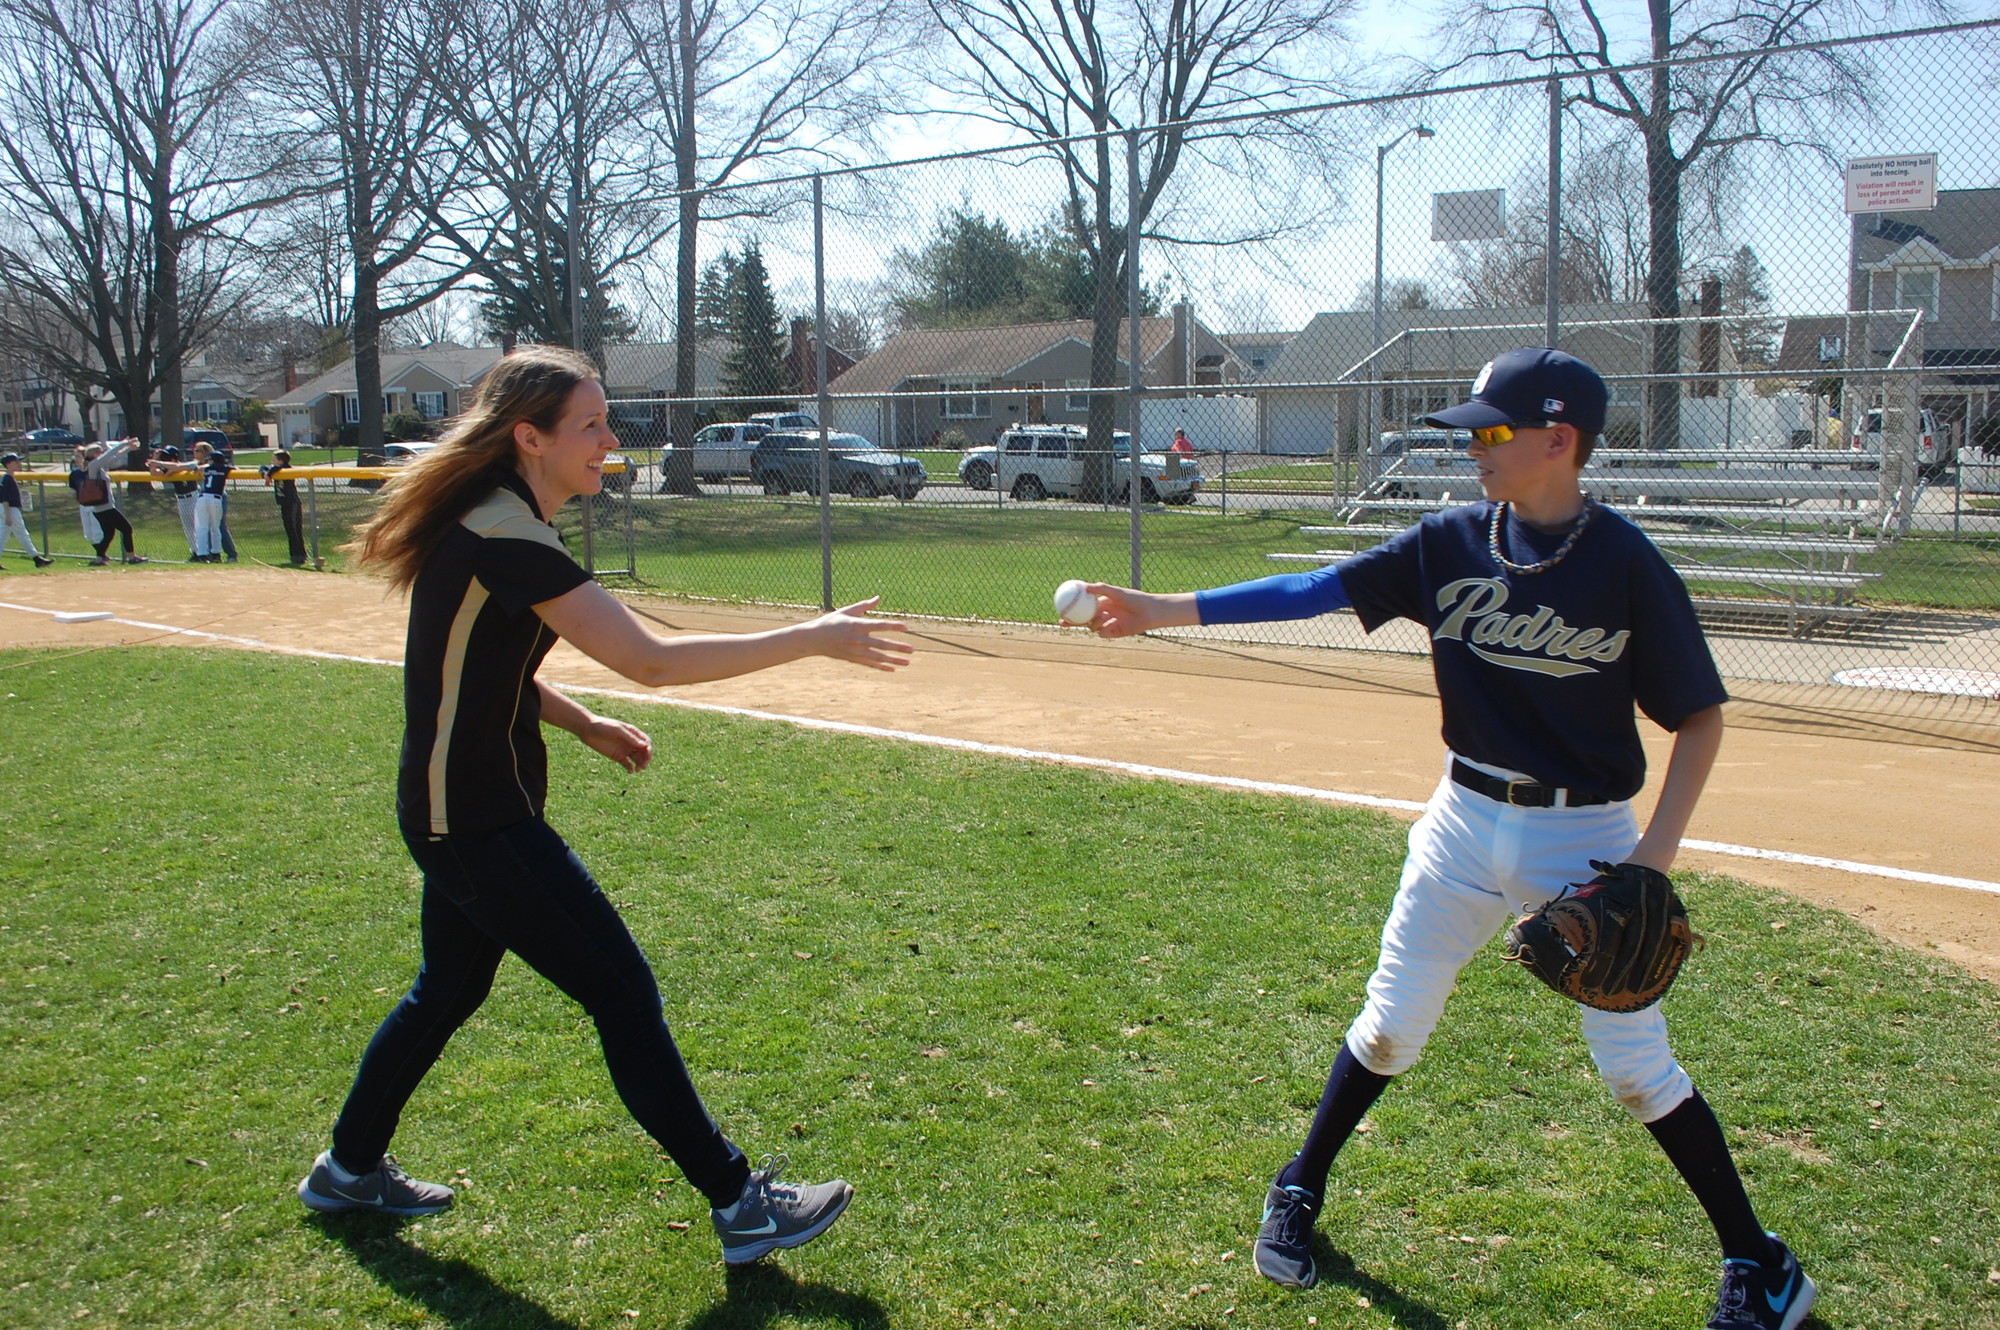 Wantagh Board of Education Trustee Kera McLoughlin Kera McLoughlin got the ball back after throwing out the first pitch.